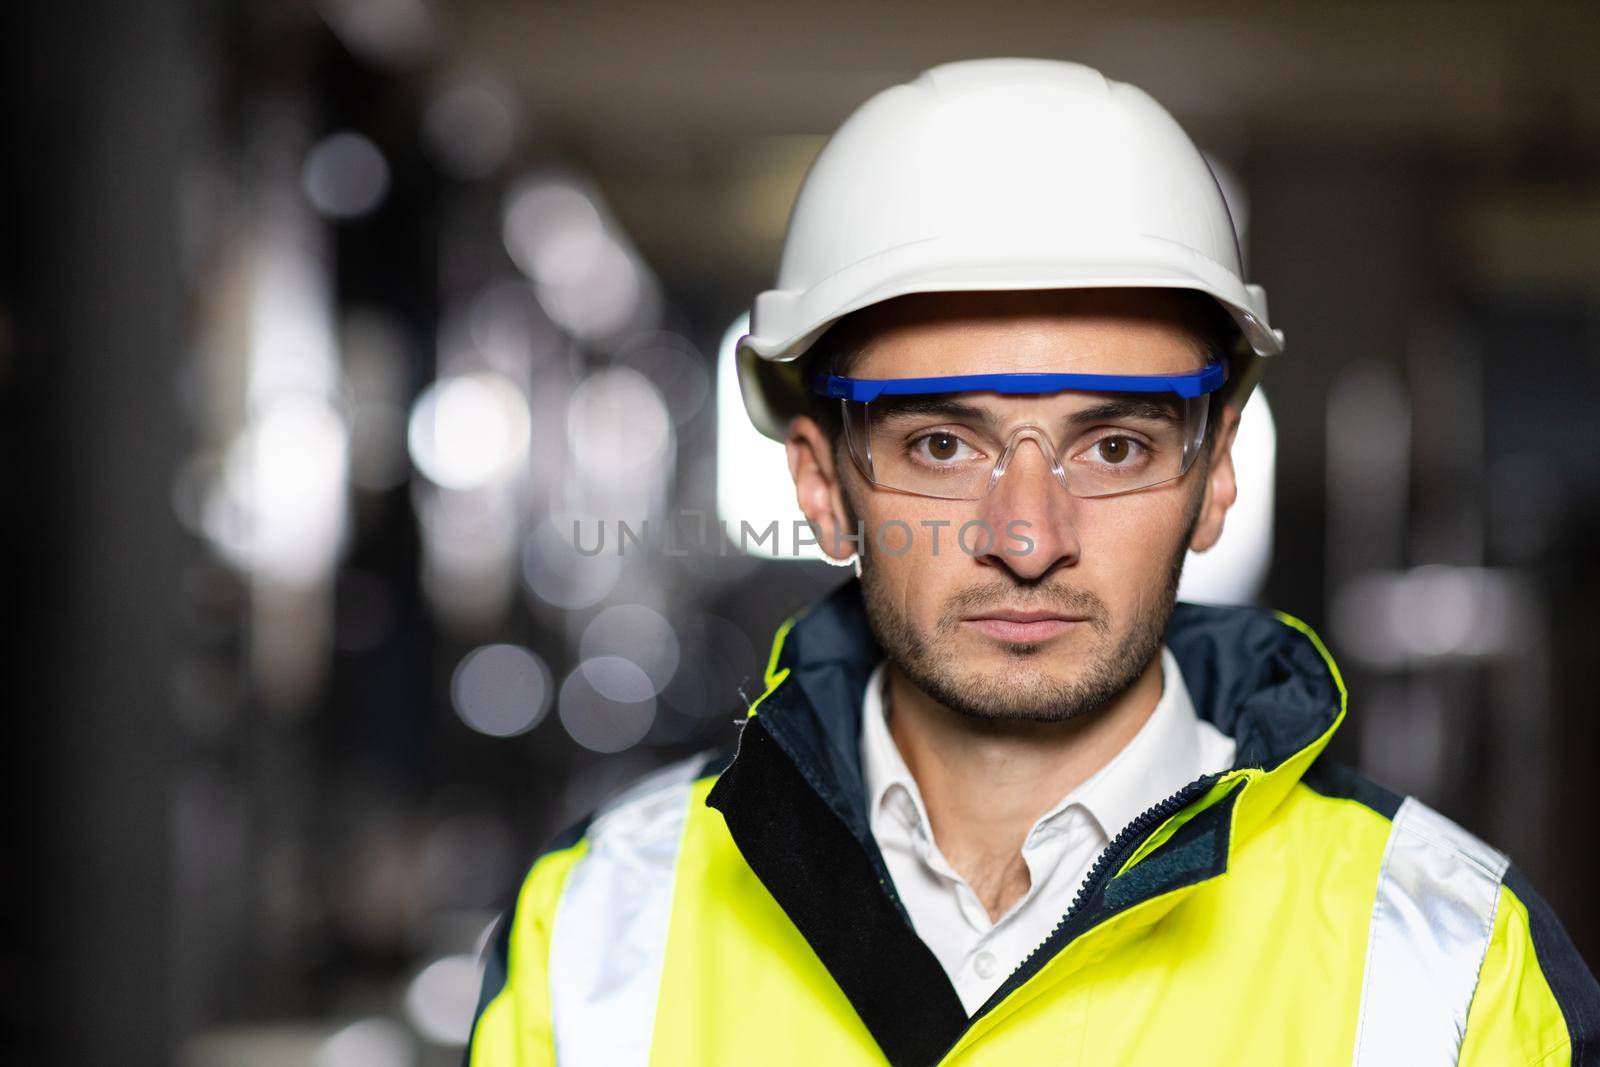 Professional Confident Serious Engineer Looking at Camera, Wearing Safety Uniform and Goggles Standing at Heavy Industry Factory Ready to Manufacturing Works During Metal Welding by Staff by uflypro